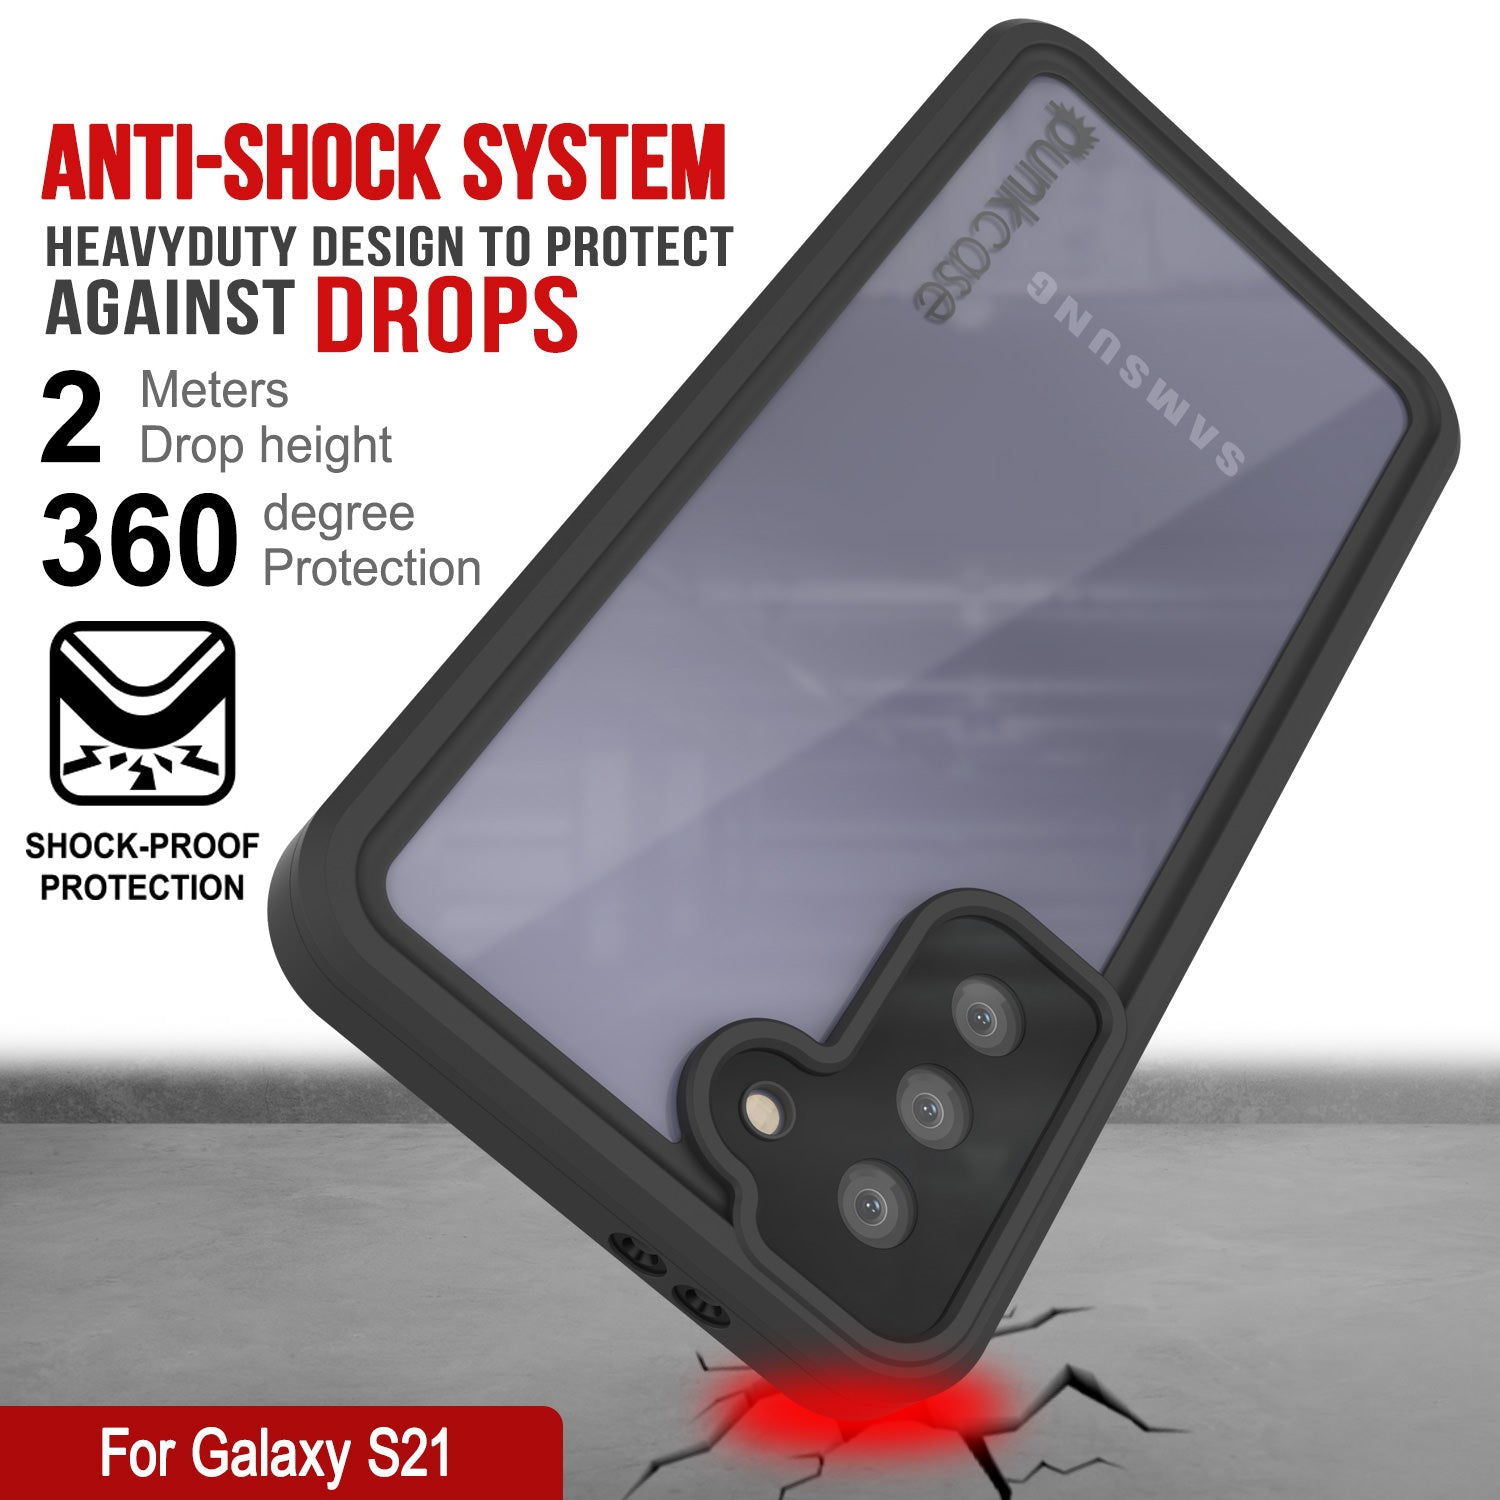 Galaxy S22 Ultra Scratch Screen Protector Clearly Protected